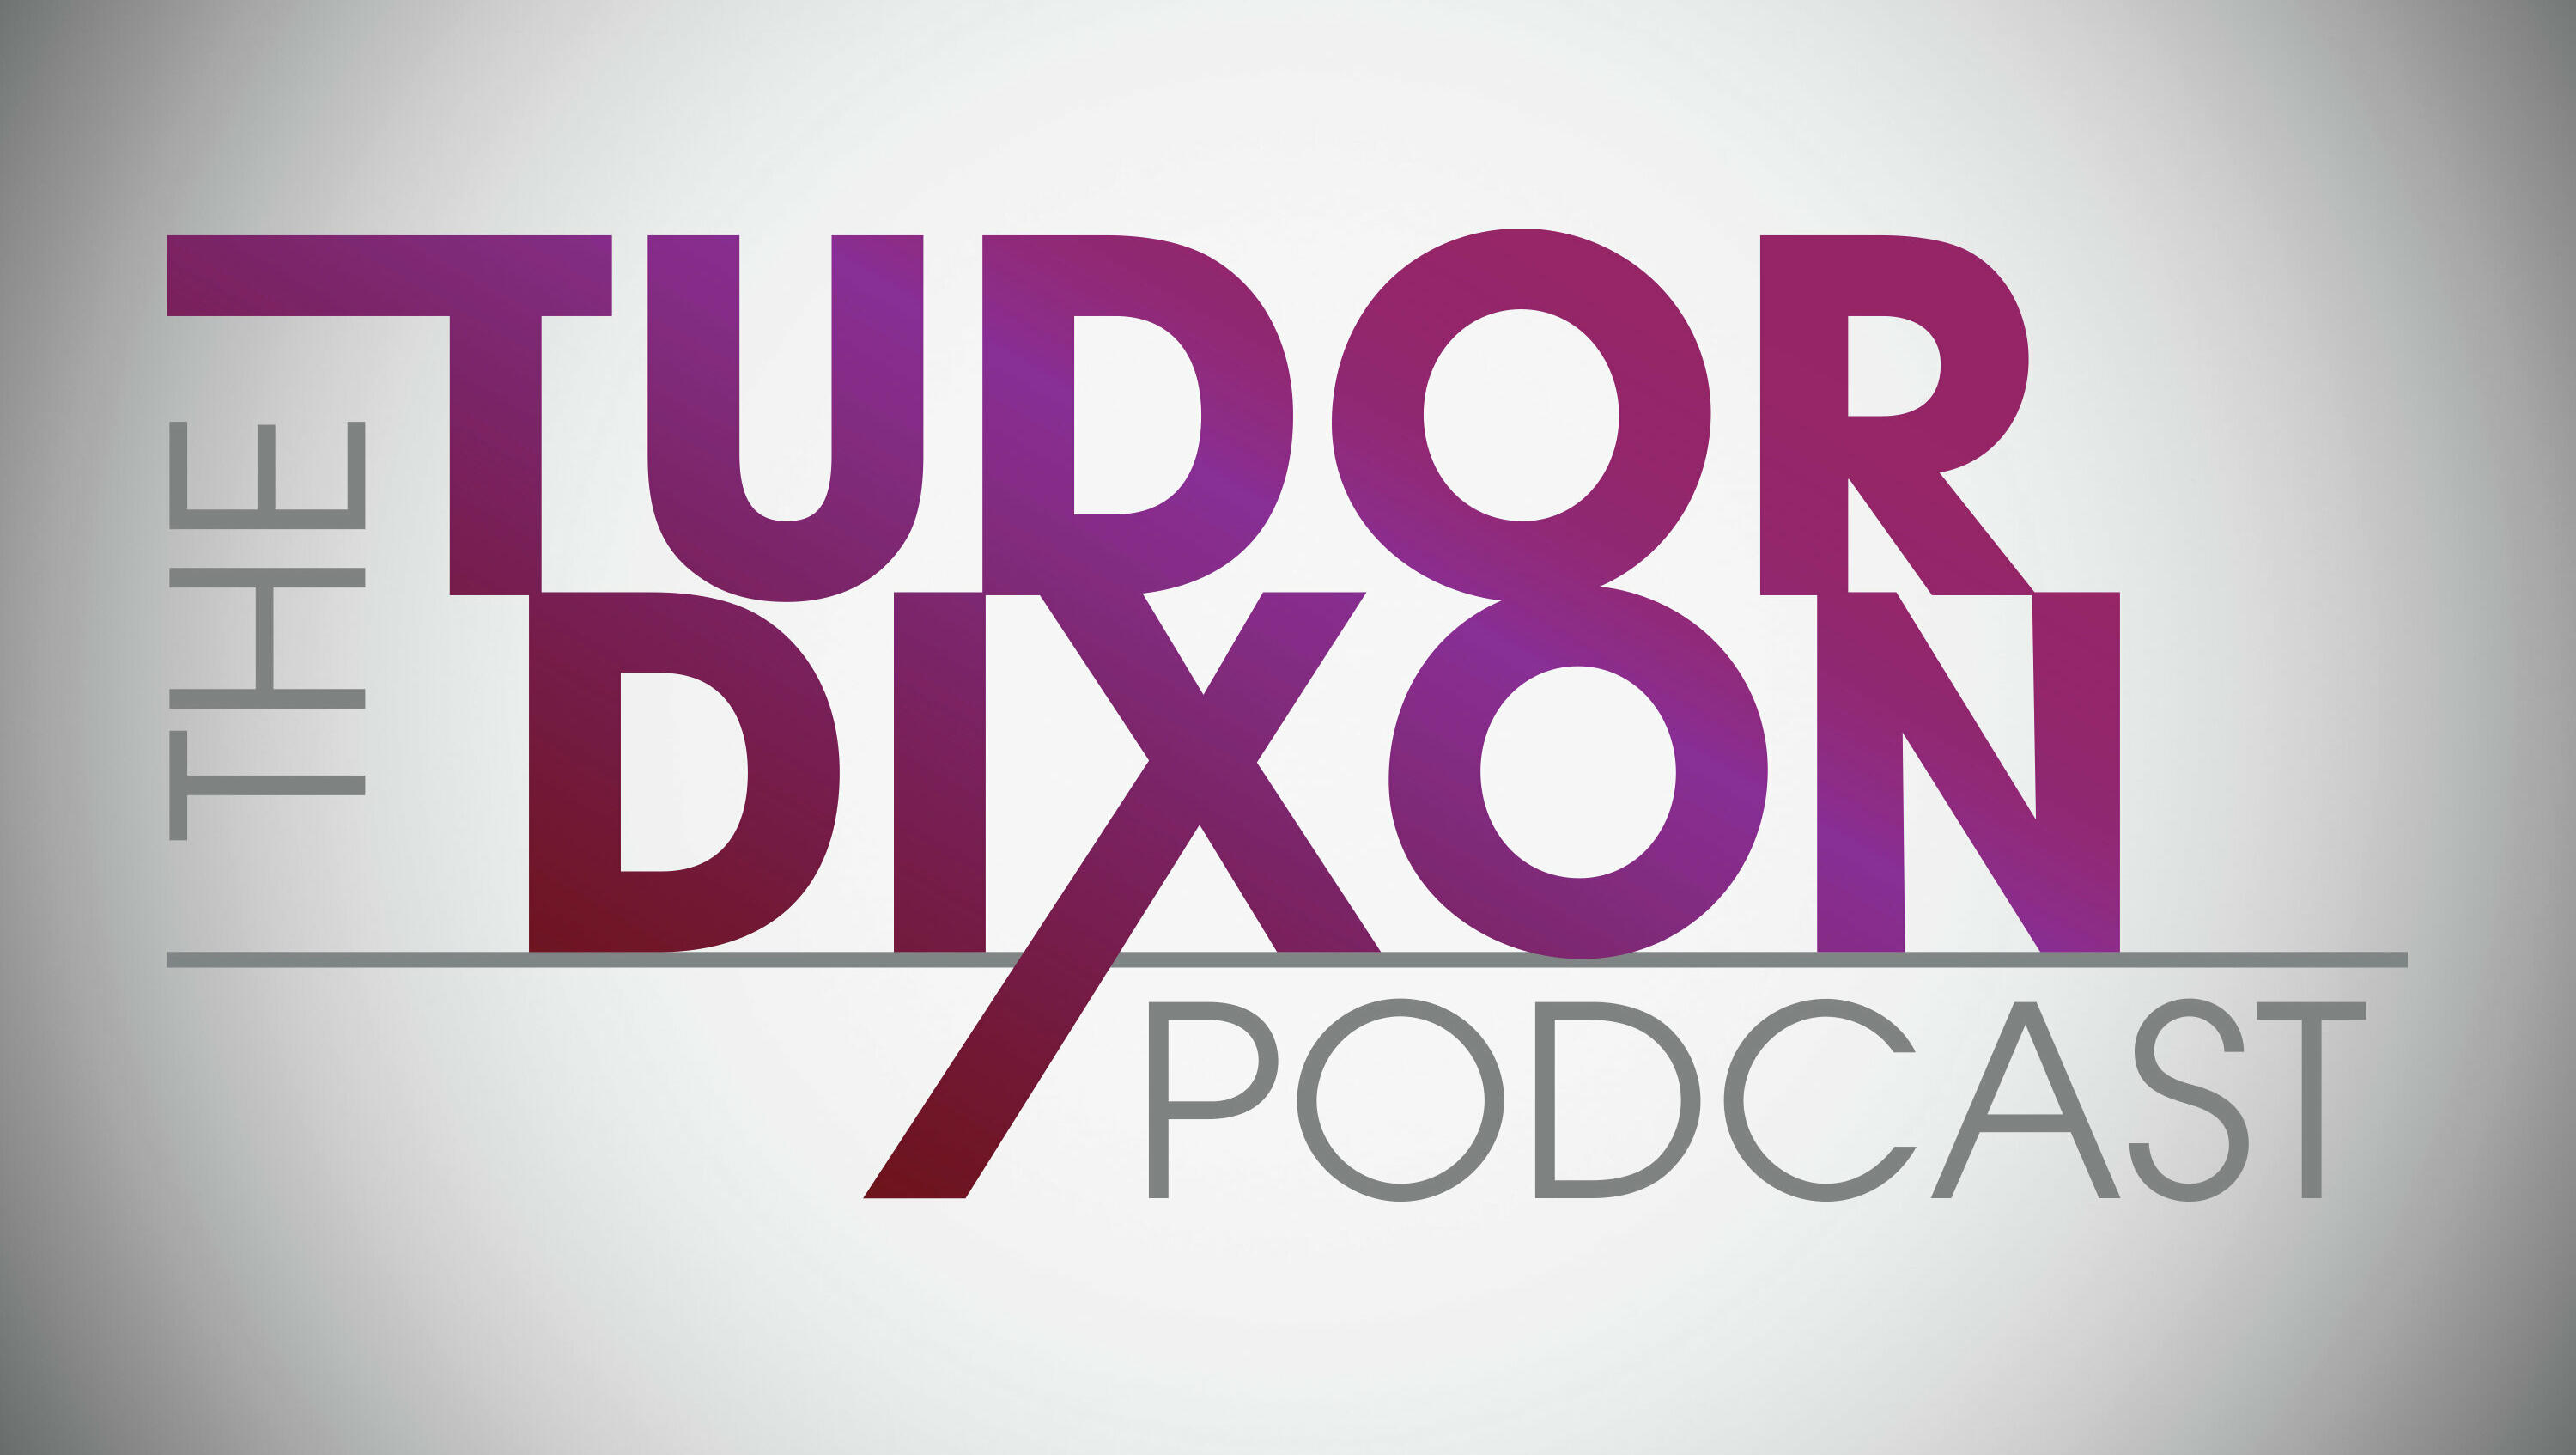 The Tudor Dixon Podcast: The Attempted Assassination of President Trump & T